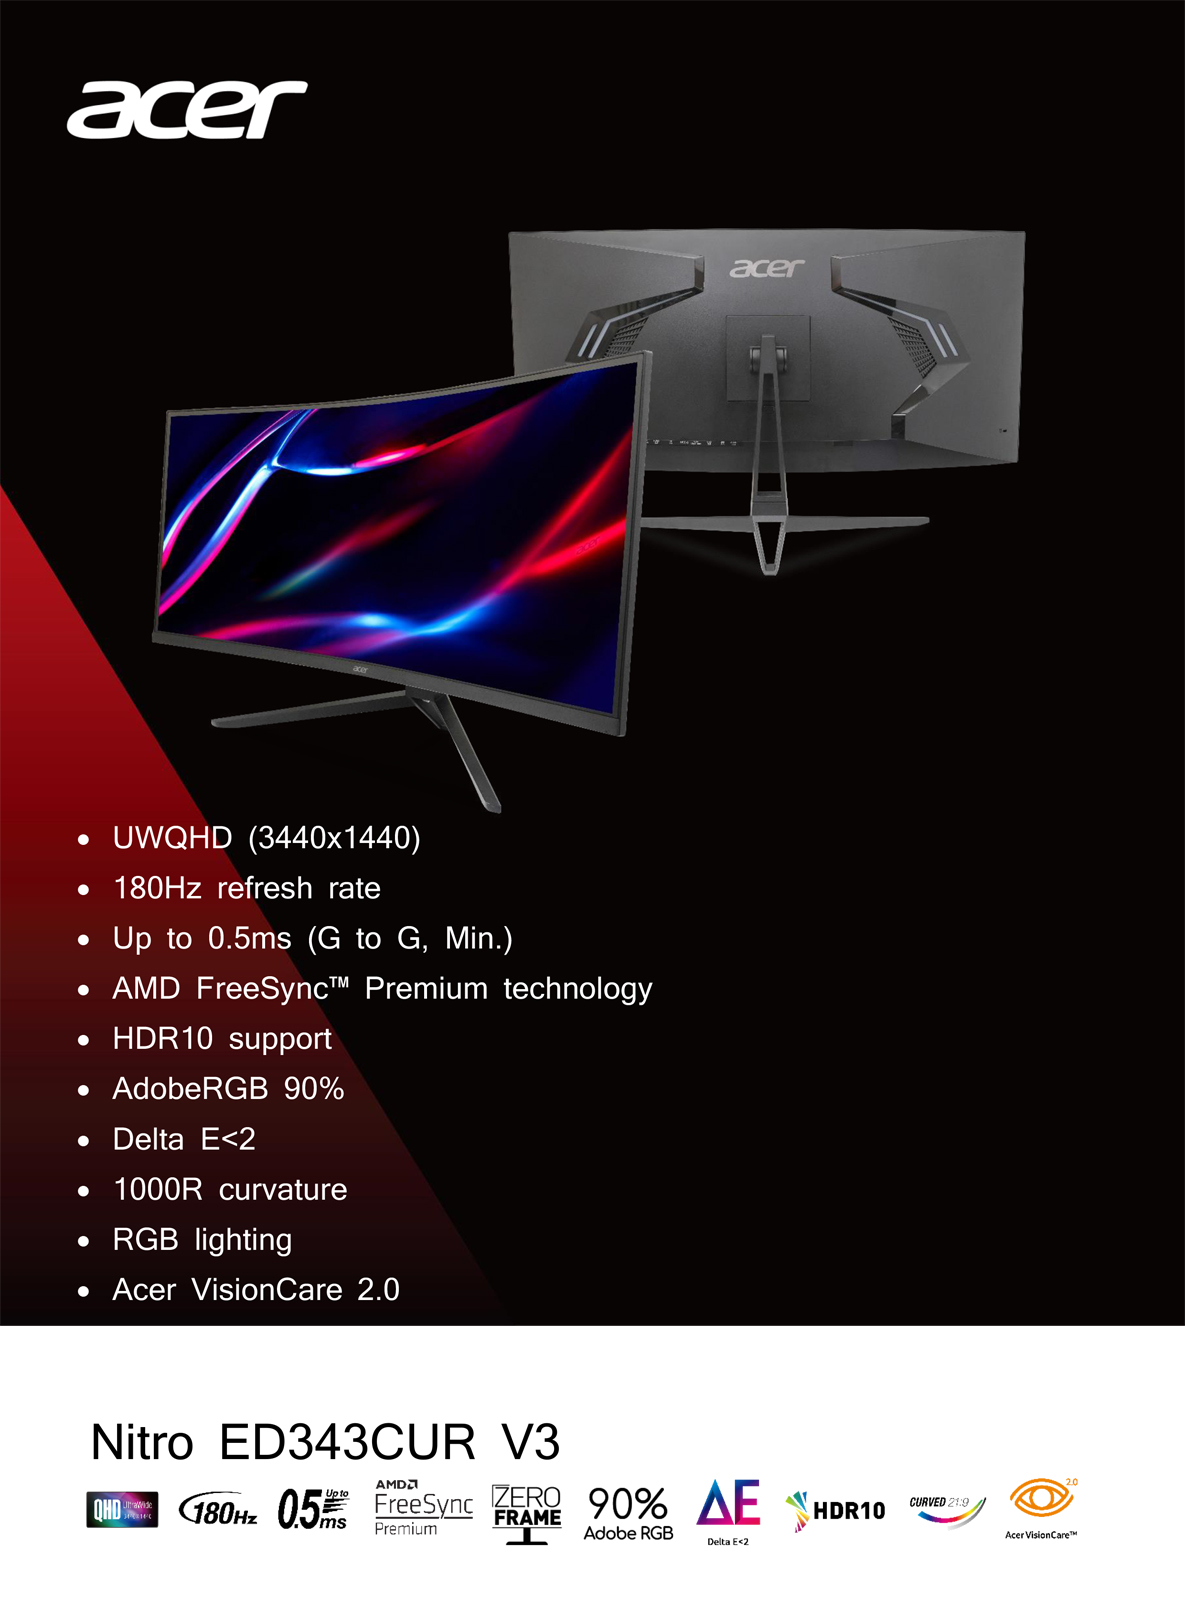 A large marketing image providing additional information about the product Acer Nitro ED343CUR V3 - 34" Curved 1440p Ultrawide 180Hz VA Monitor - Additional alt info not provided